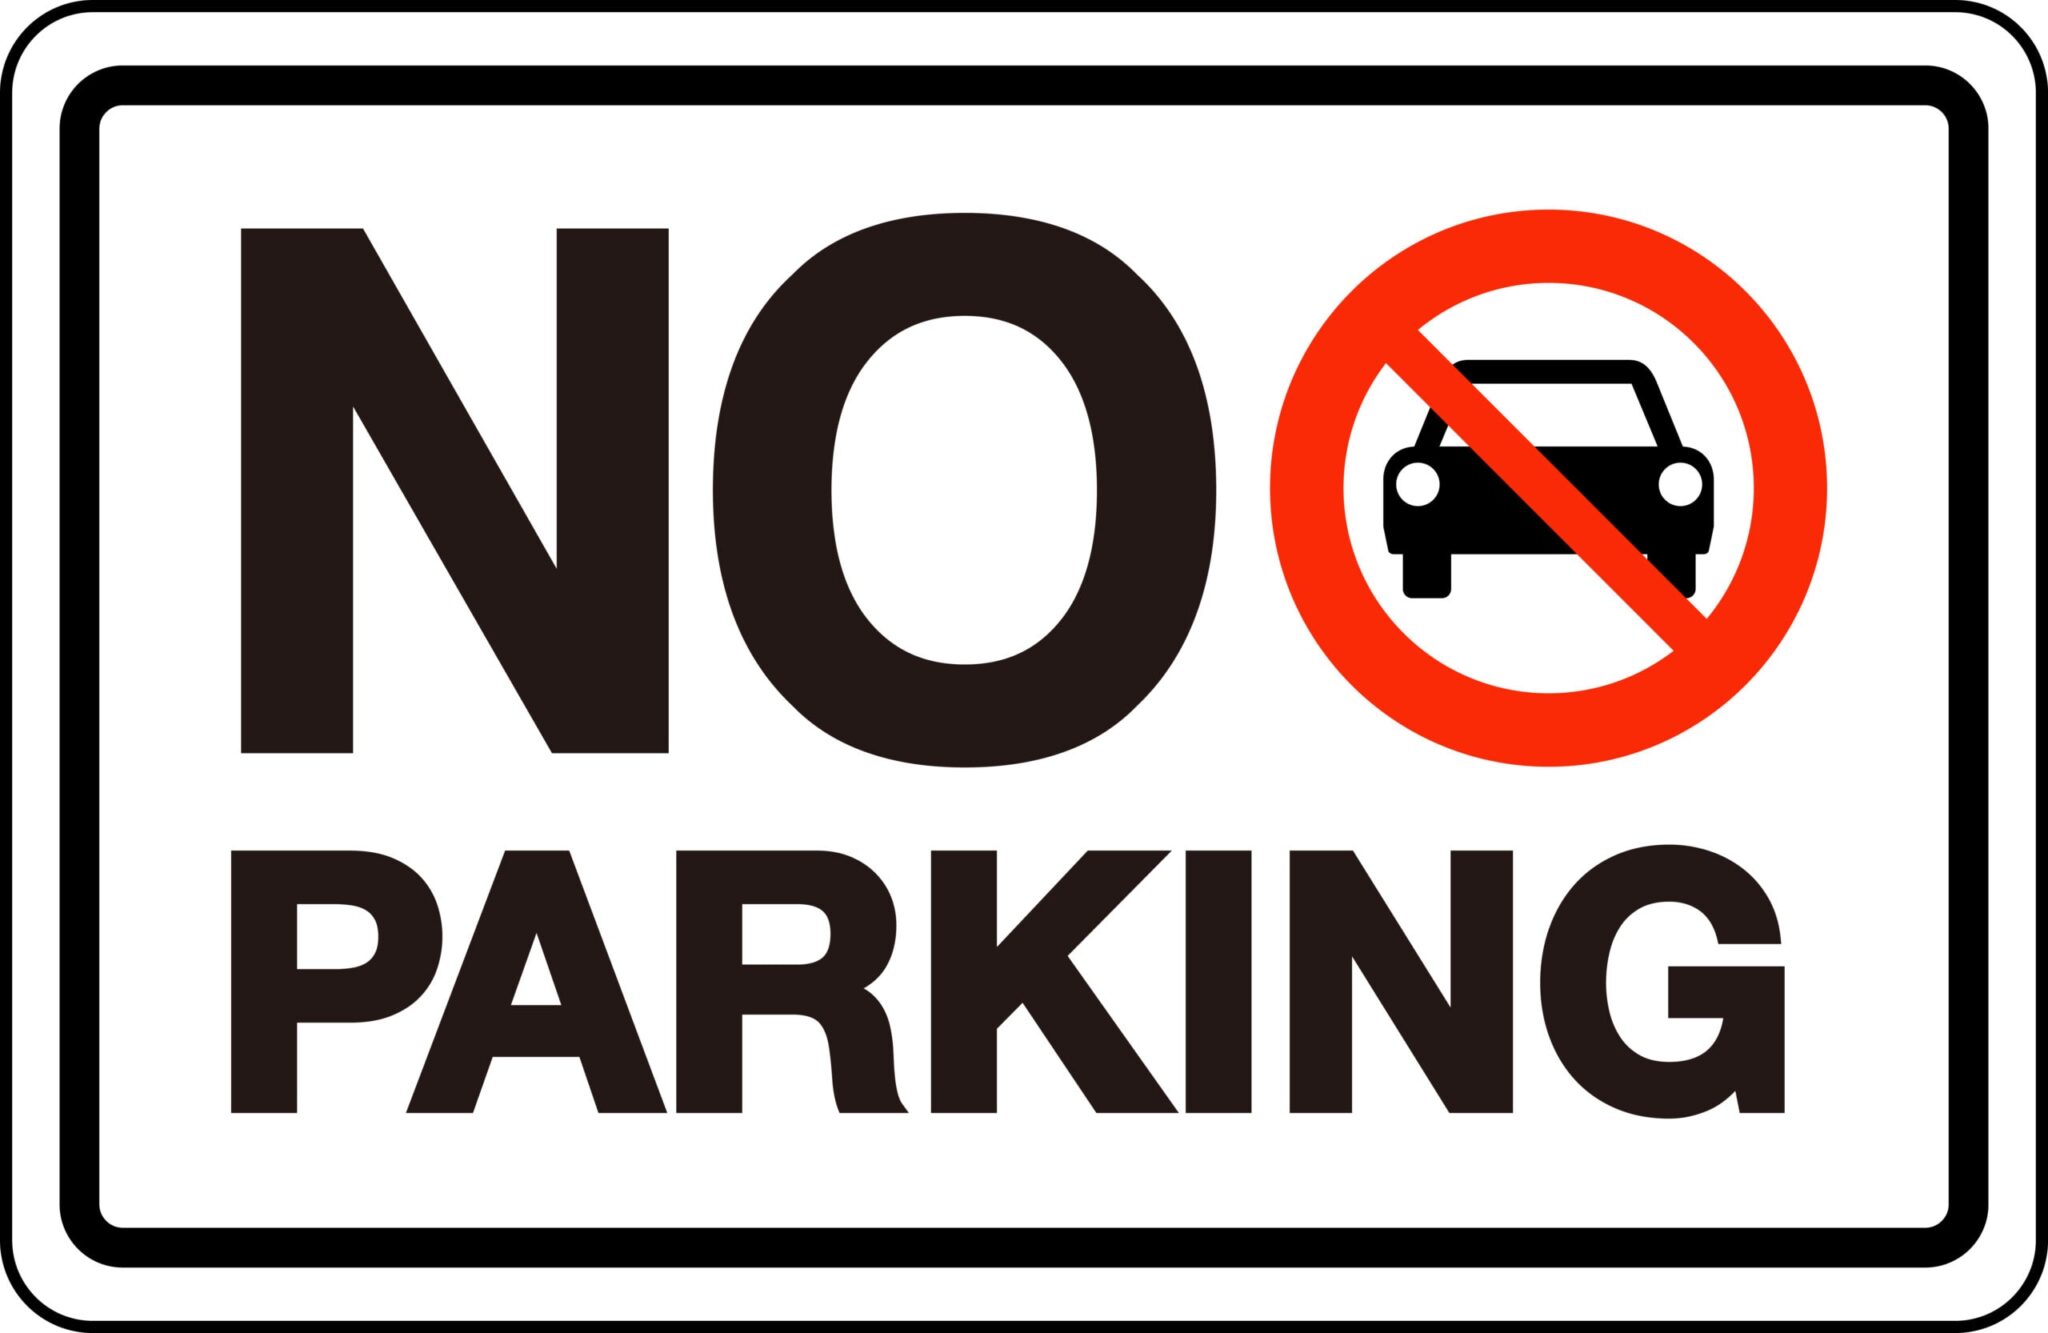 A no parking sign on a white background, emphasizing parking restrictions.